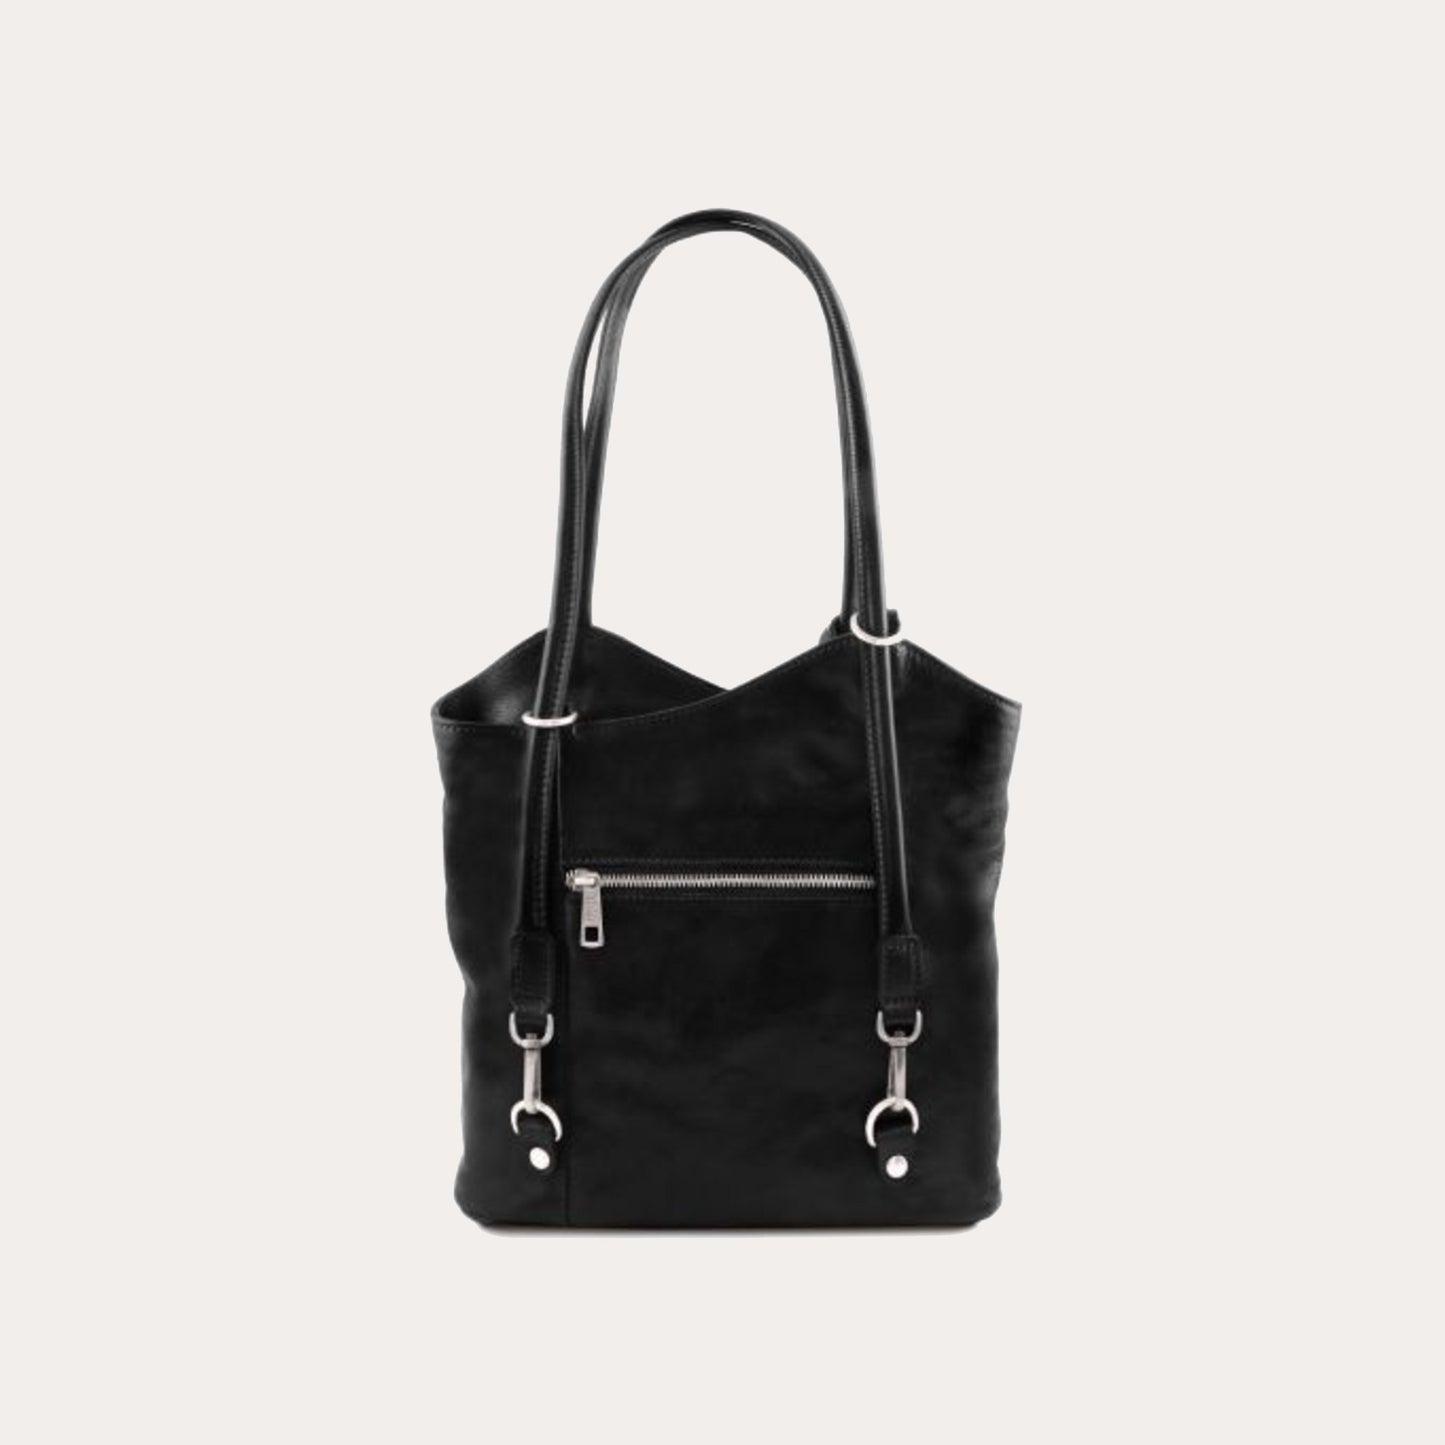 Tuscany Leather Black Leather Convertible Bag